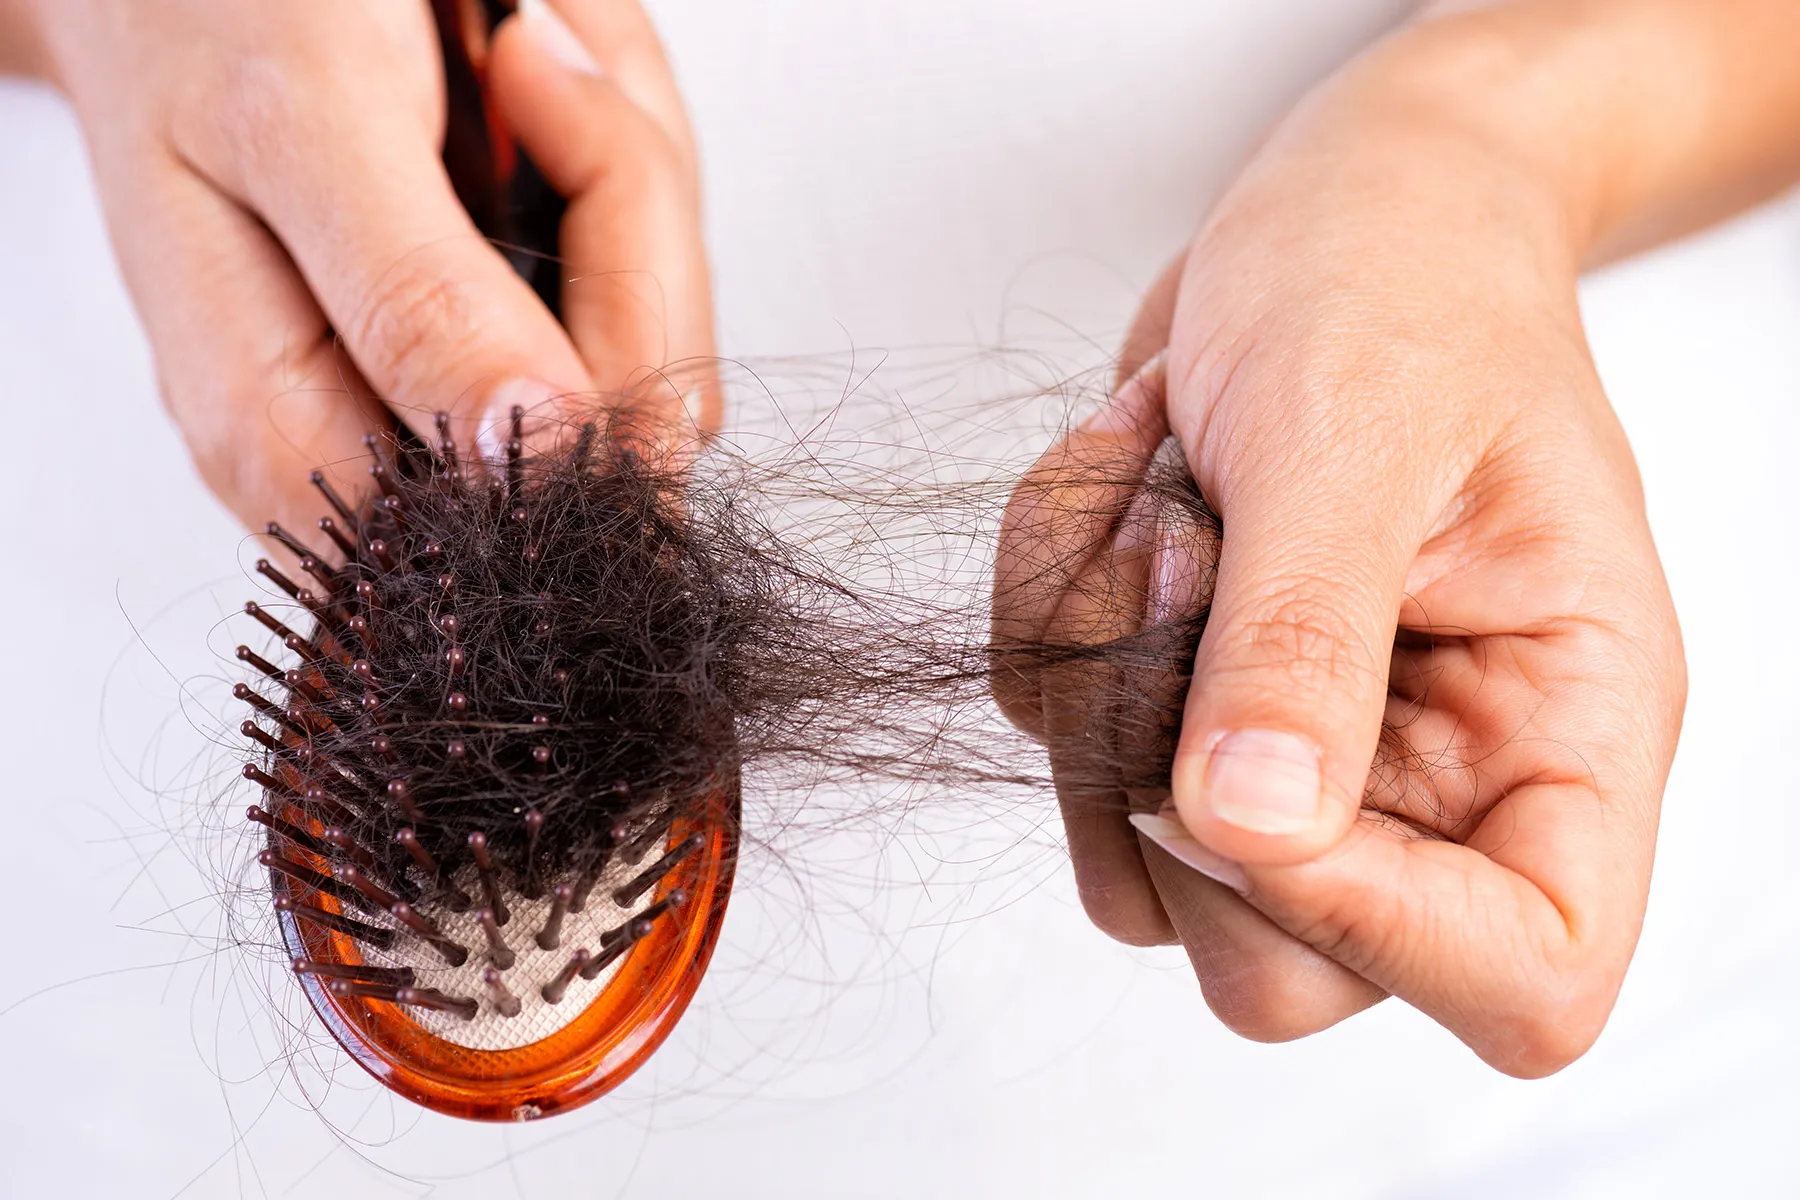 Sometimes Hair Loss in Women Can Point to Bigger Health Issues